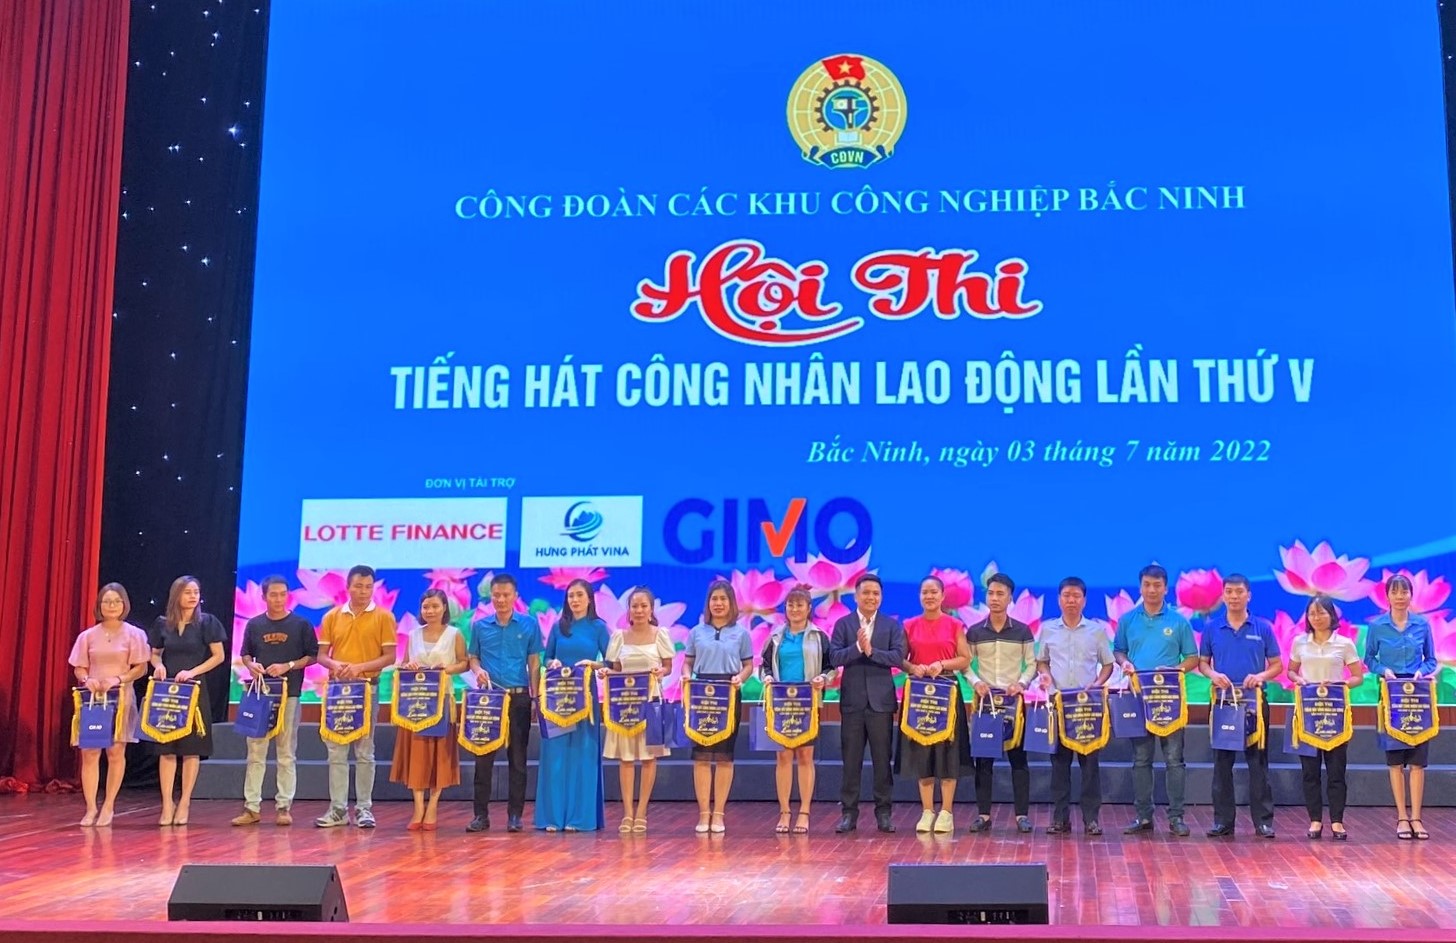 GIMO in collaboration with the Trade Unions of Bac Ninh Industrial Zones to promote workers’ welfare